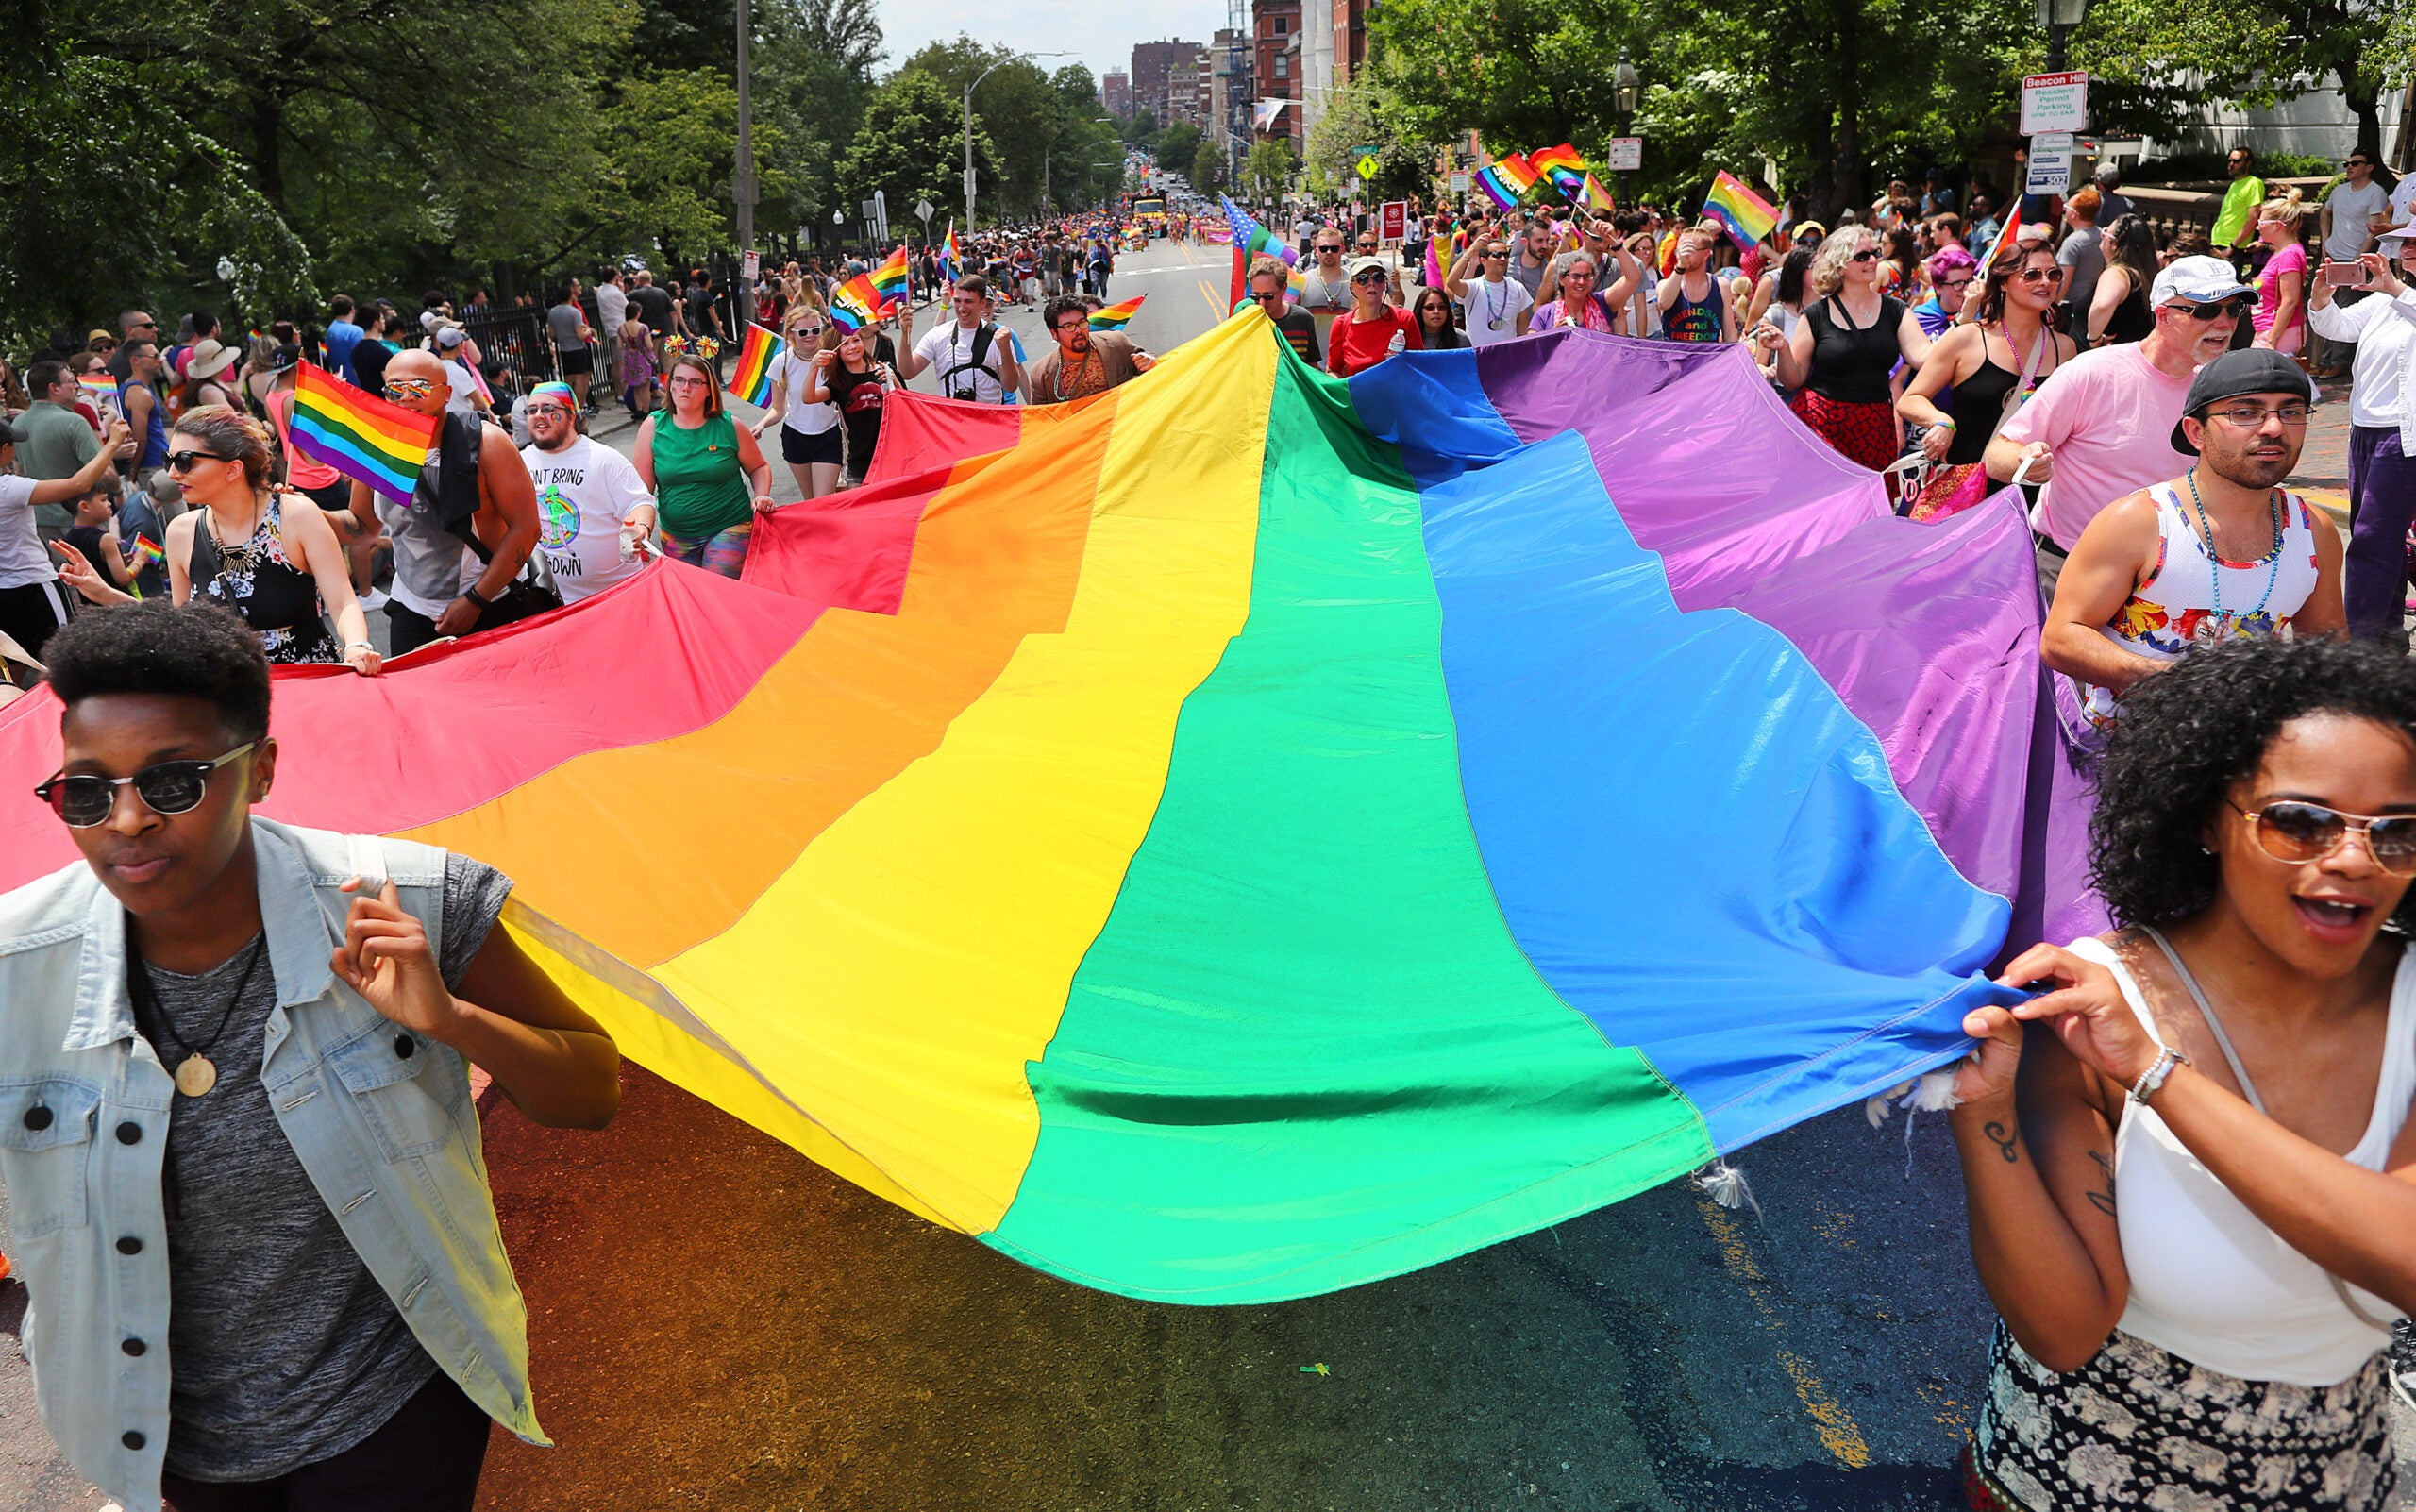 When is the gay pride parade in boston